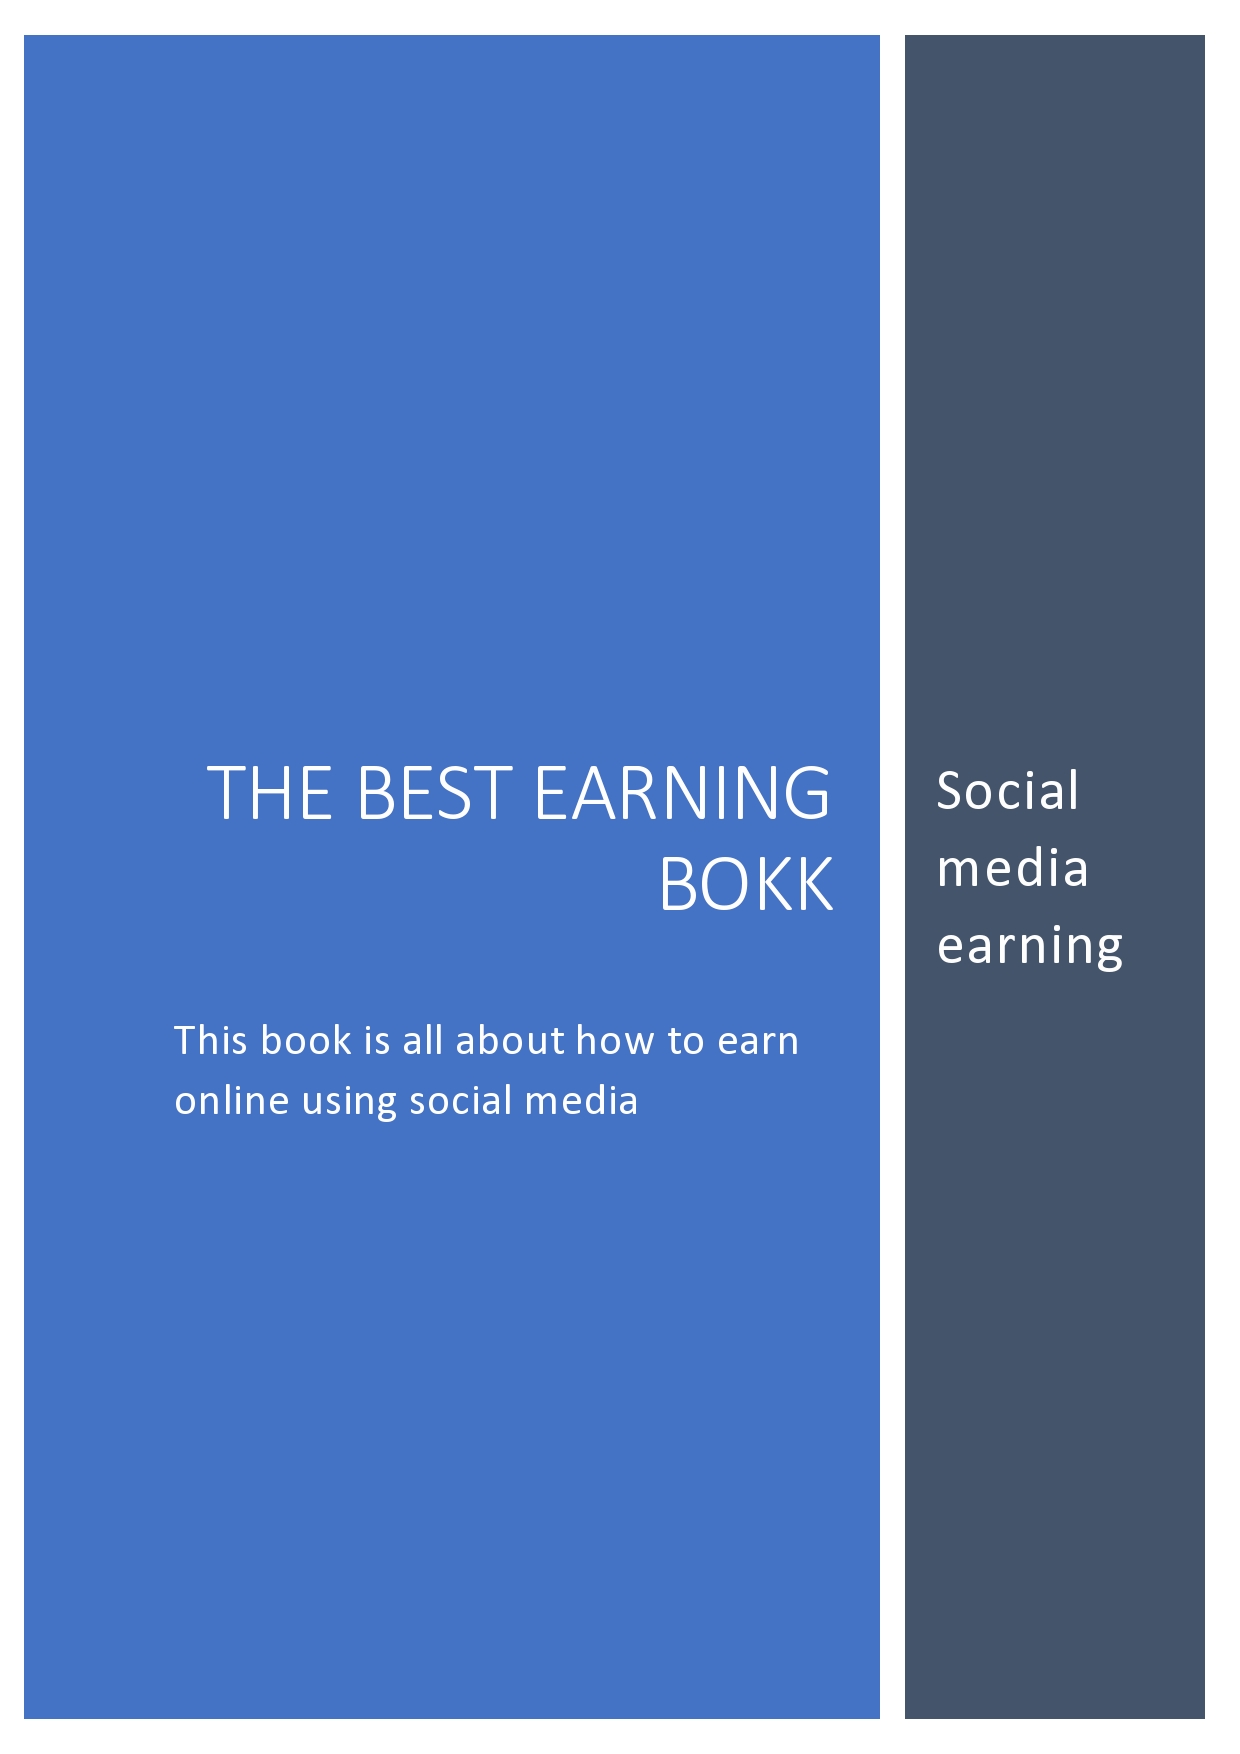 the best earning book